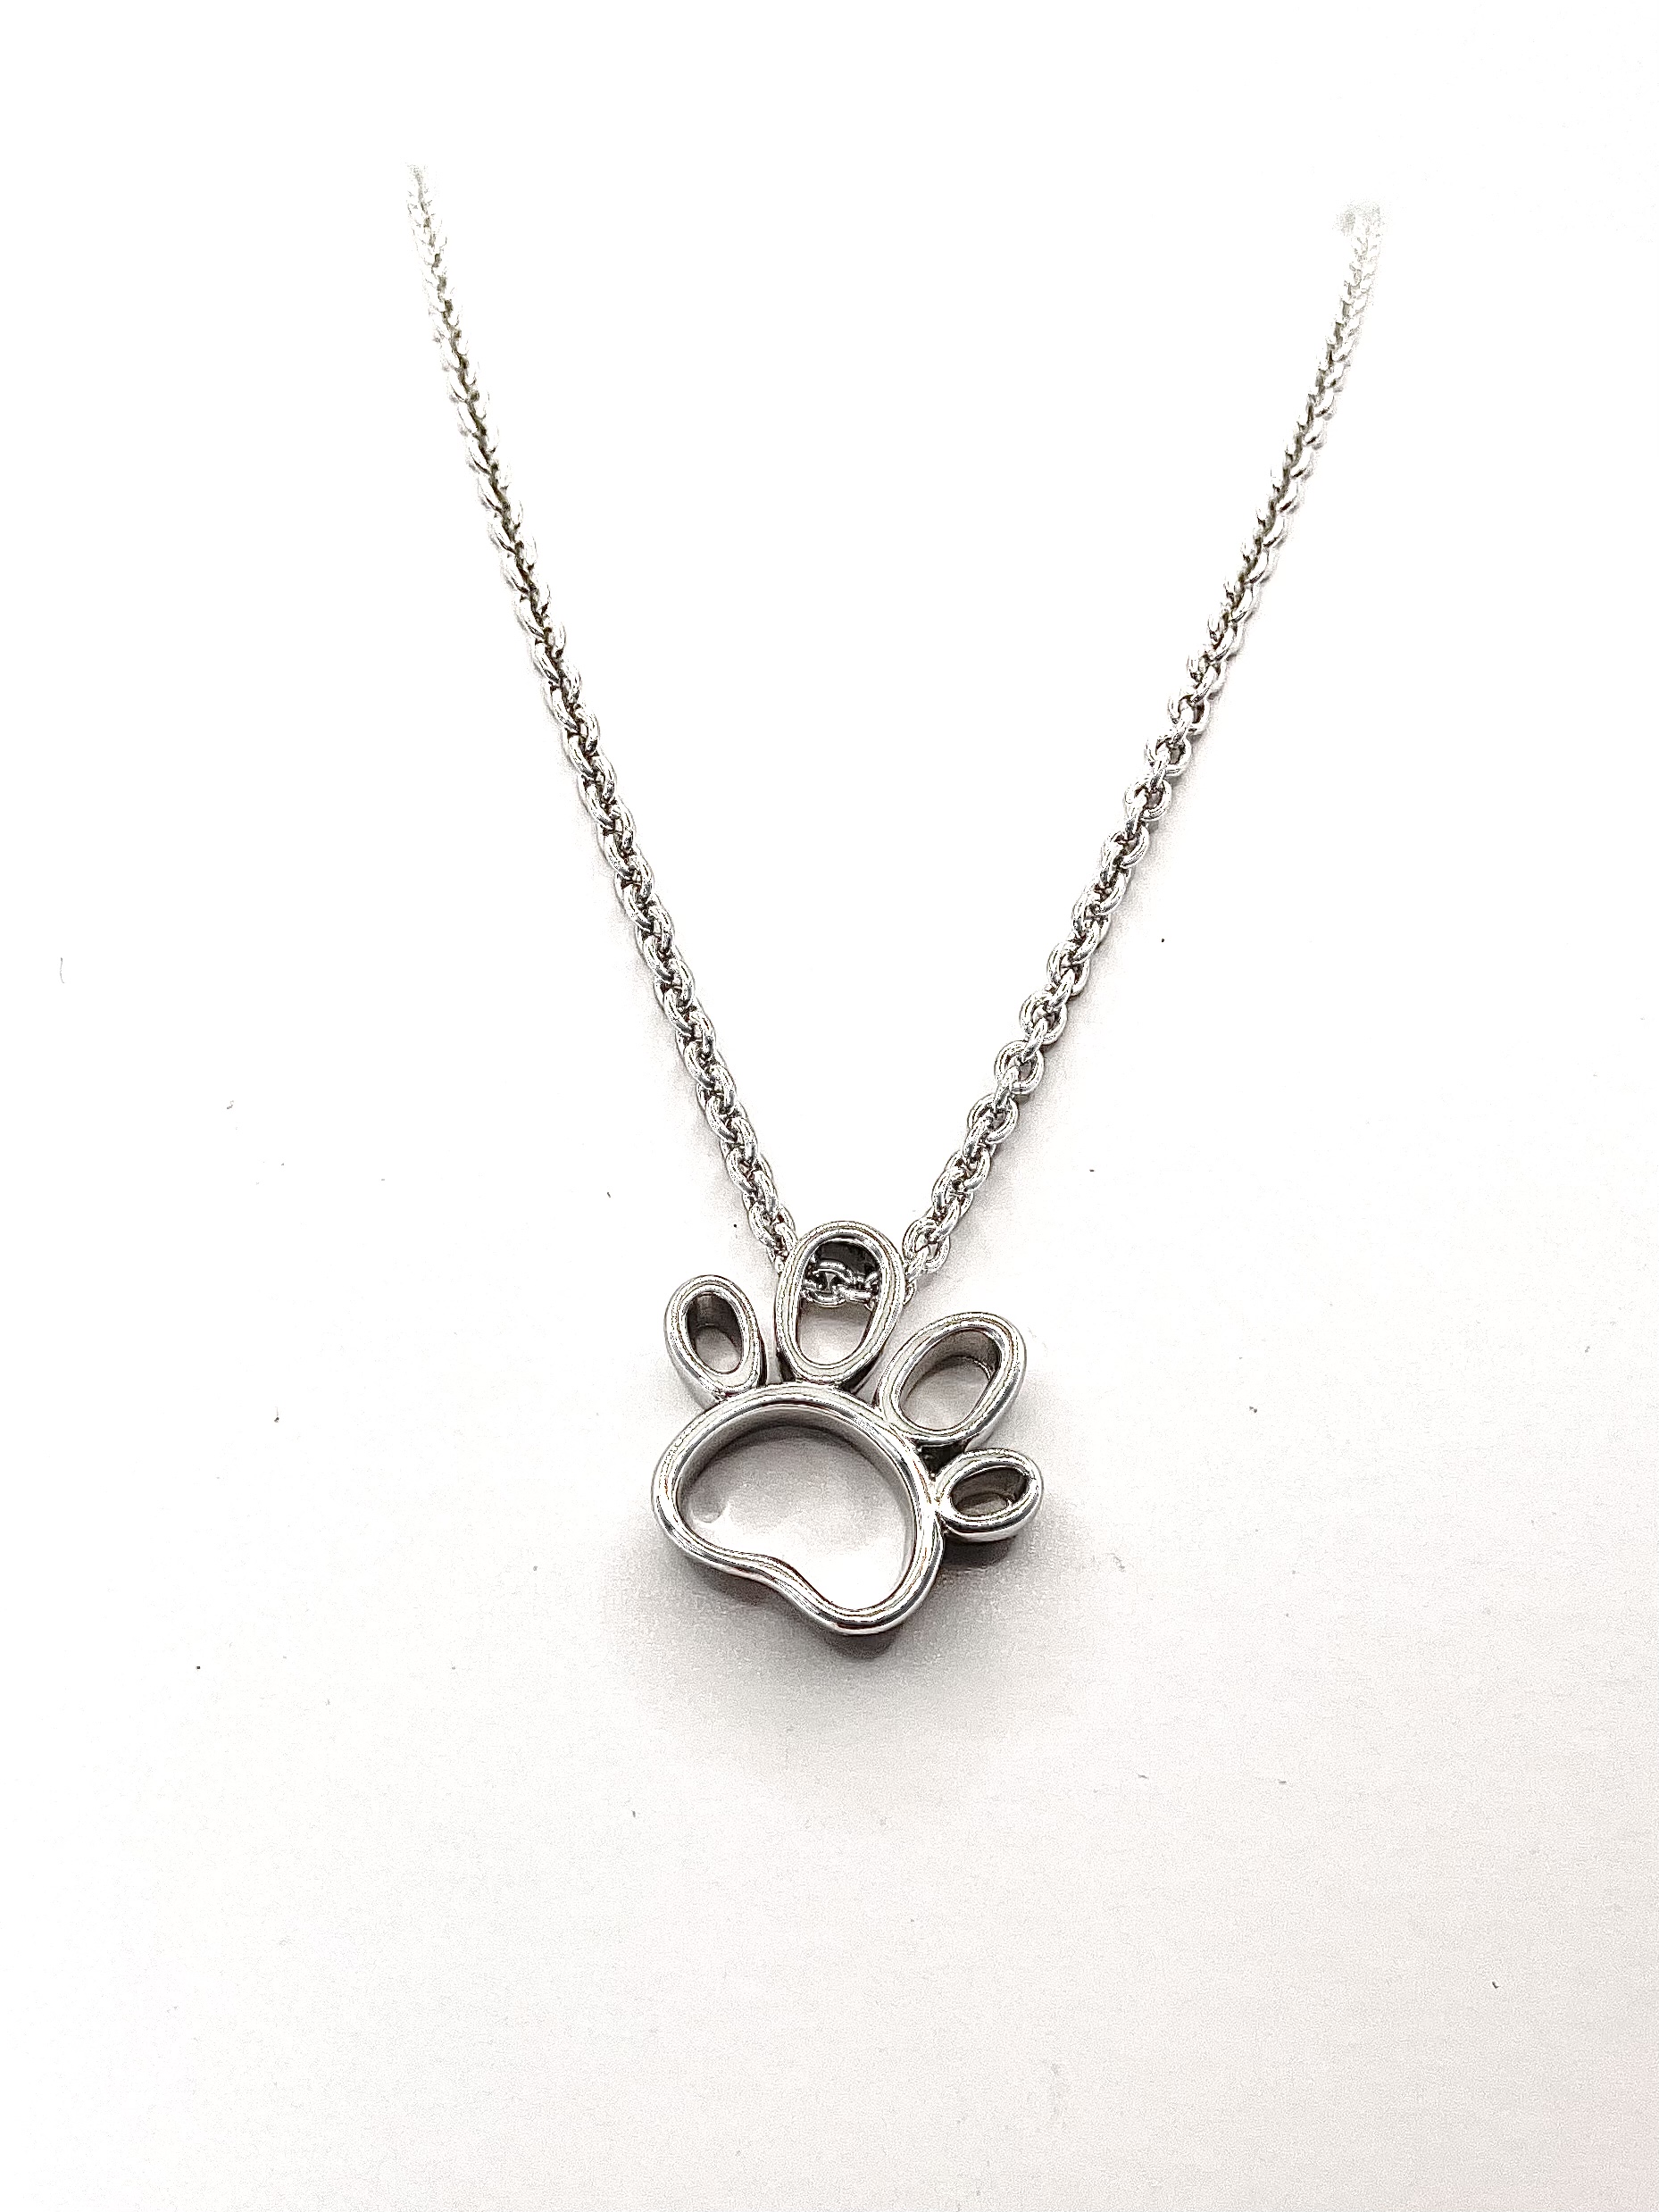 Open Dog Paw Small Necklace Sterling Silver - Lisa Welch Designs